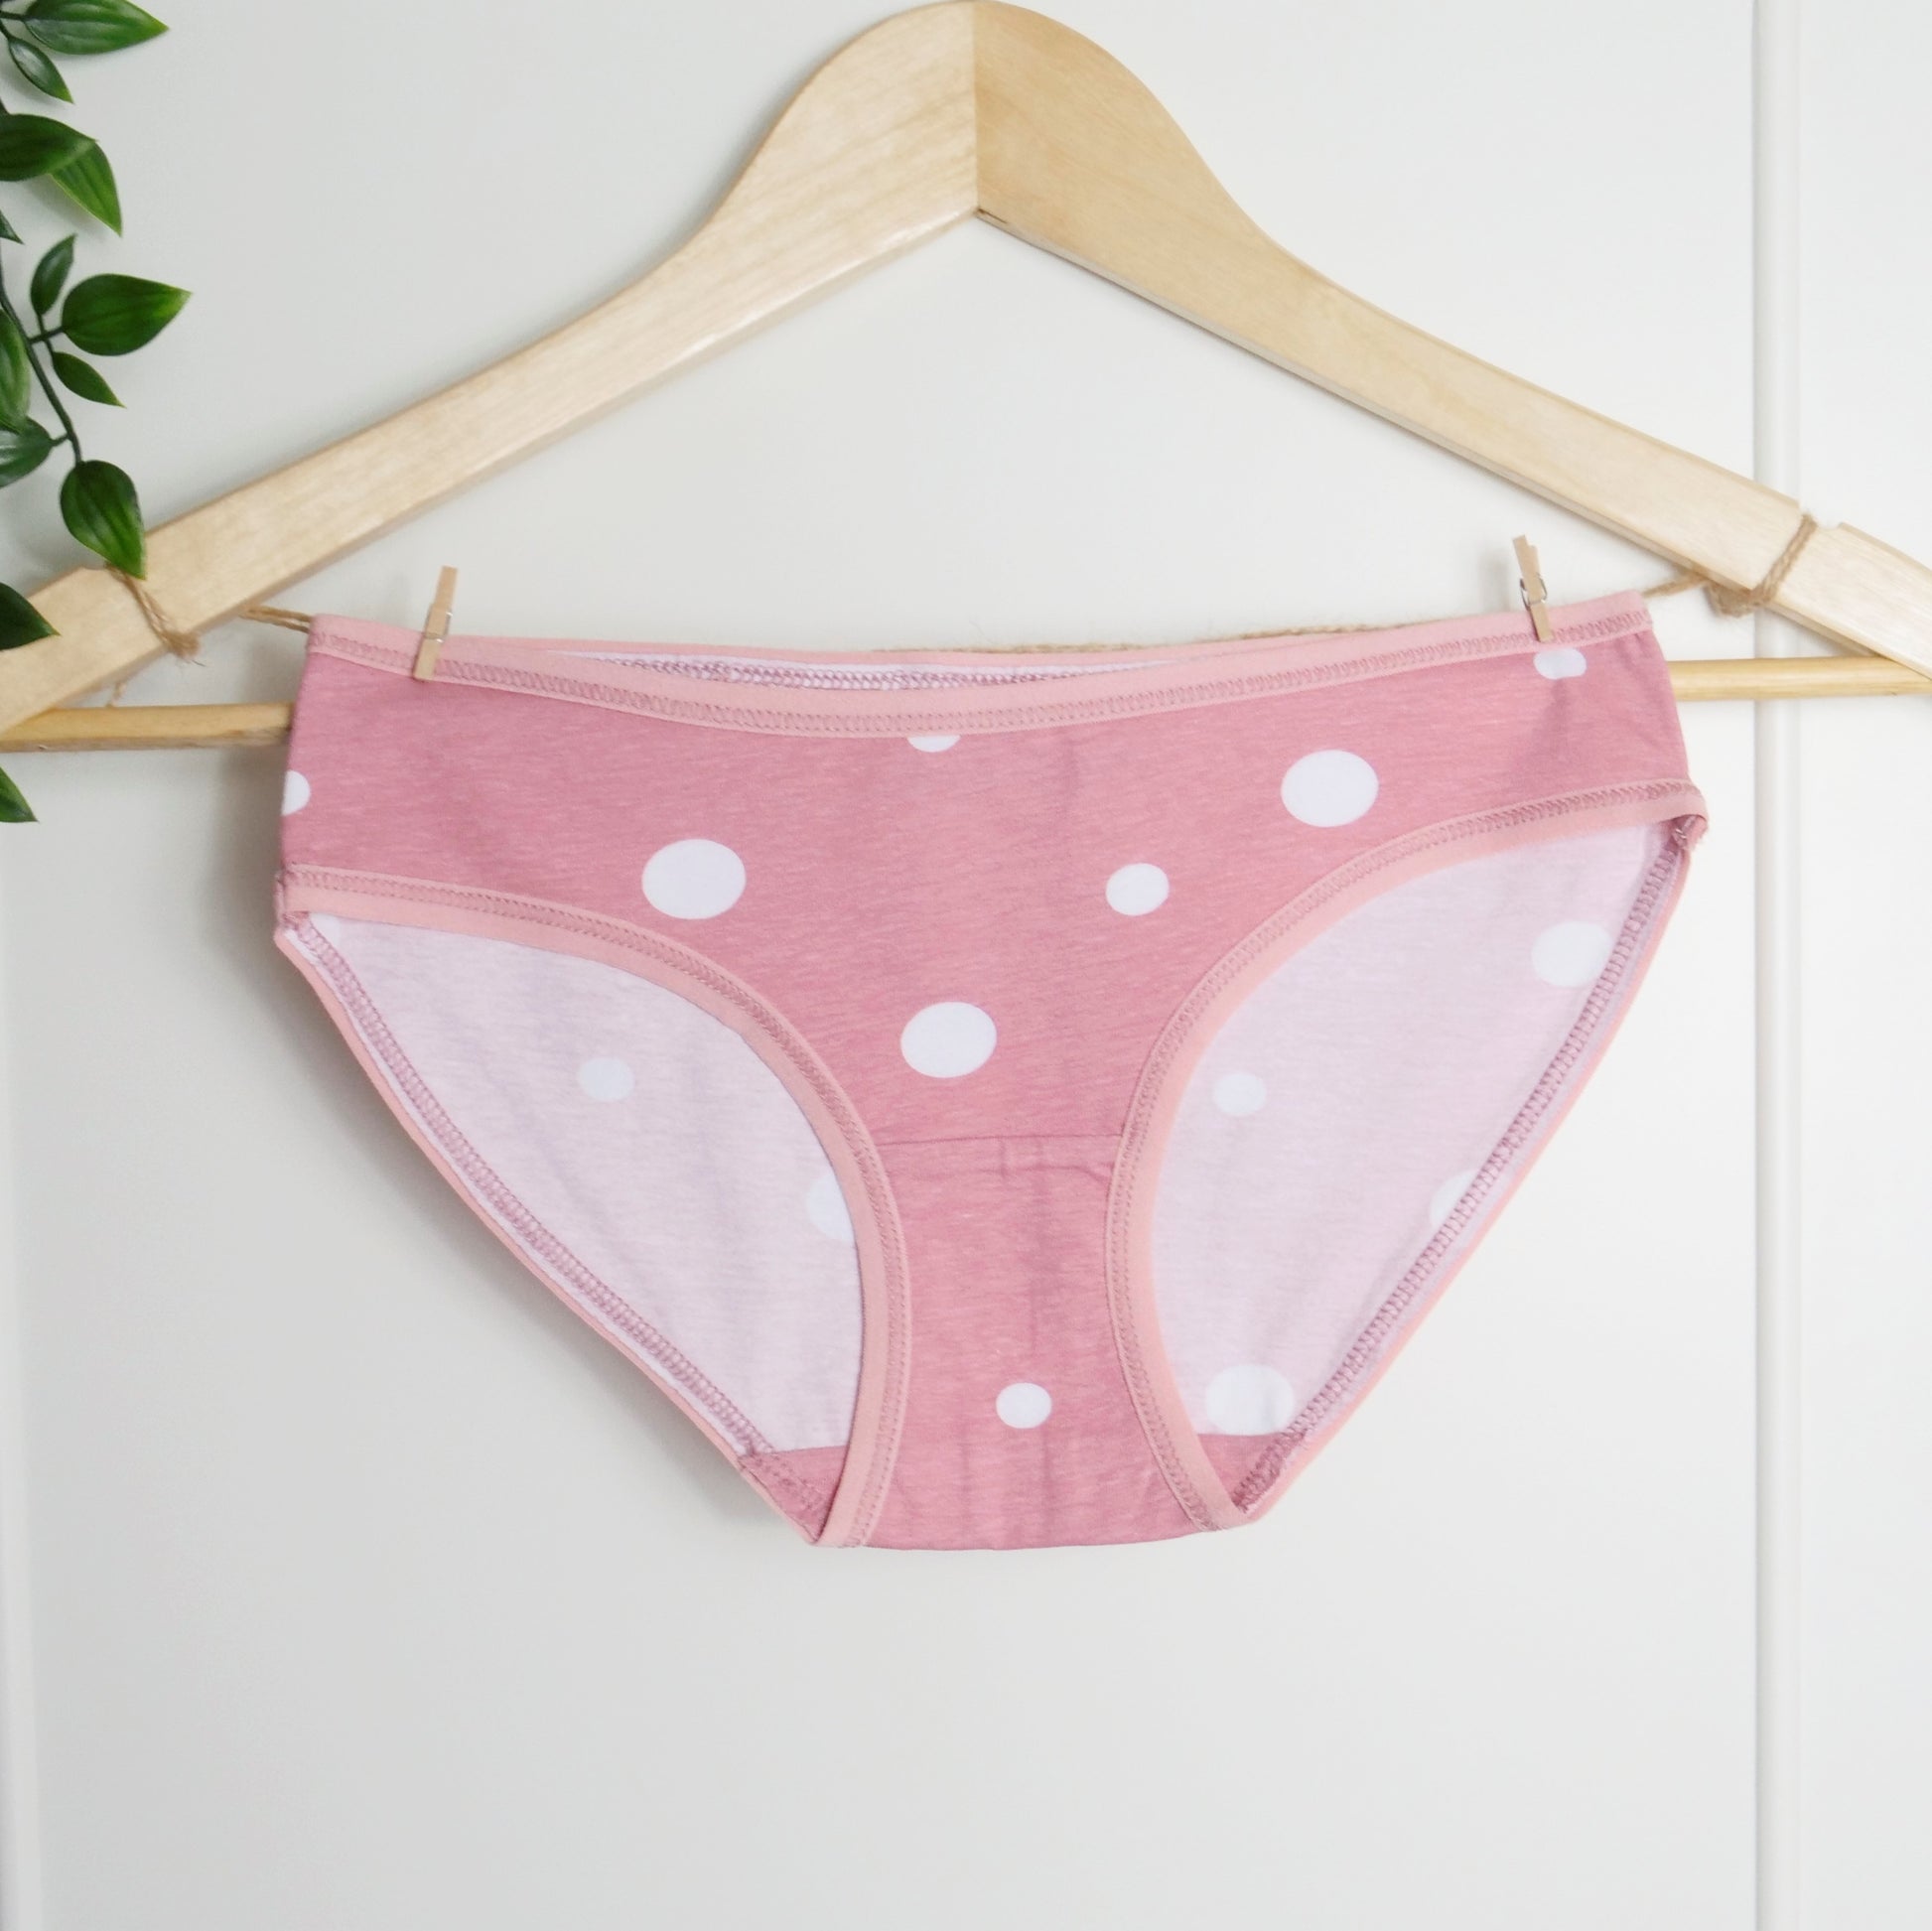 Girls' organic cotton knickers - pink with white dots